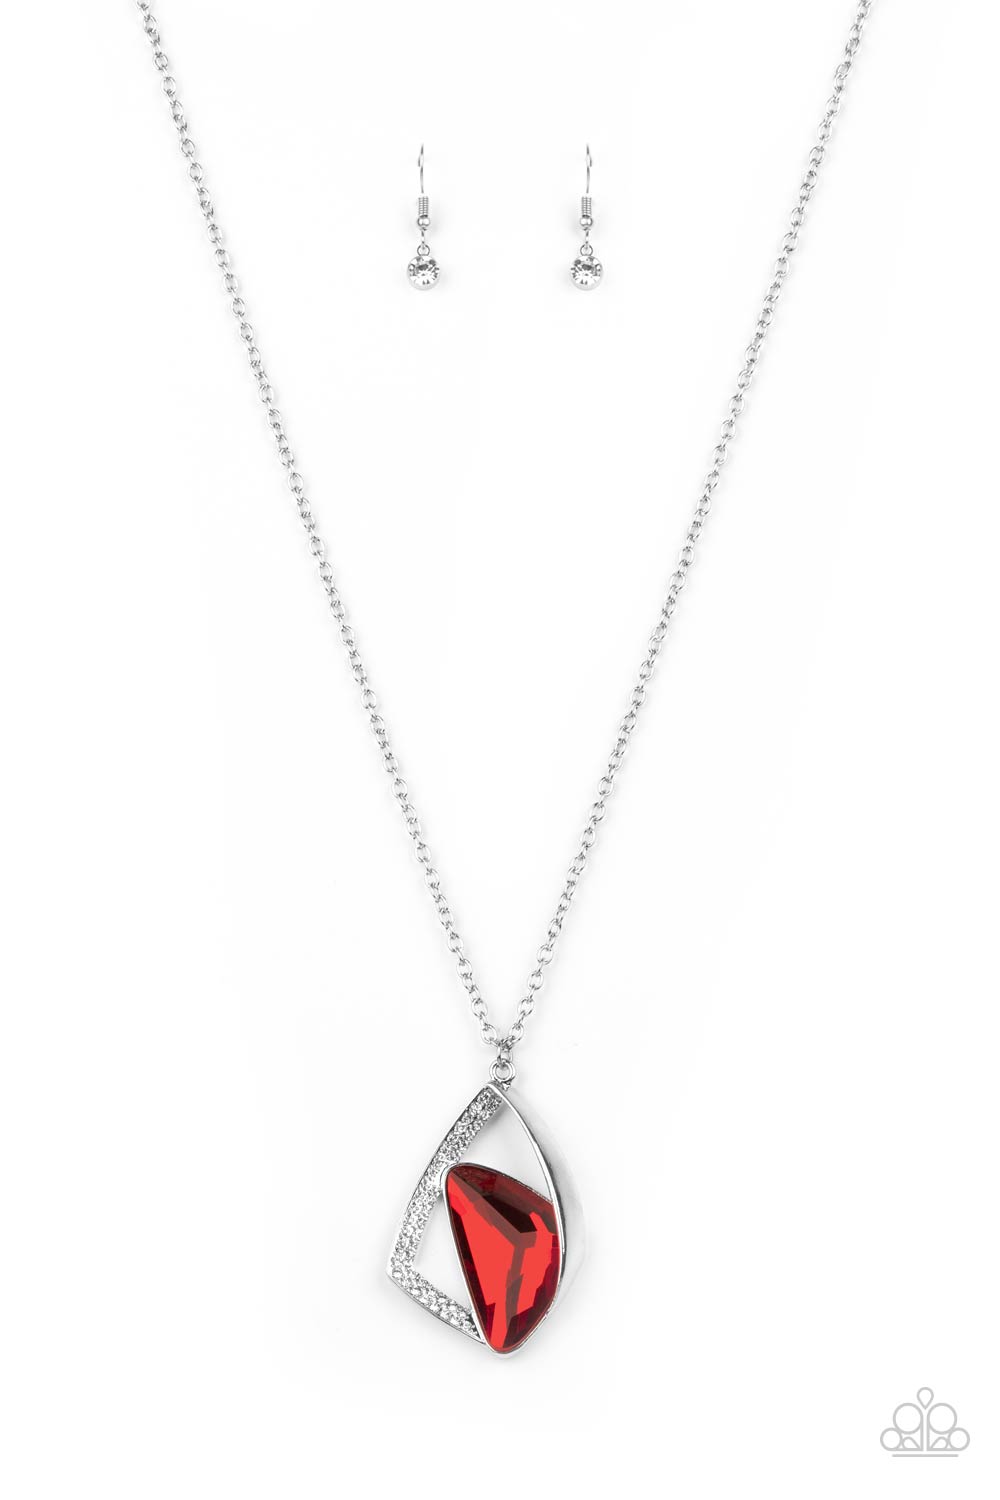 Galatic Wonder - Red Rhinestone Necklaces triangular red gem is nestled inside folds of a shiny silver frame and white rhinestone encrusted silver ribbons, creating an asymmetrical pendant at the bottom of a lengthened silver chain. Features an adjustable clasp closure.  Sold as one individual necklace. Includes one pair of matching earrings.